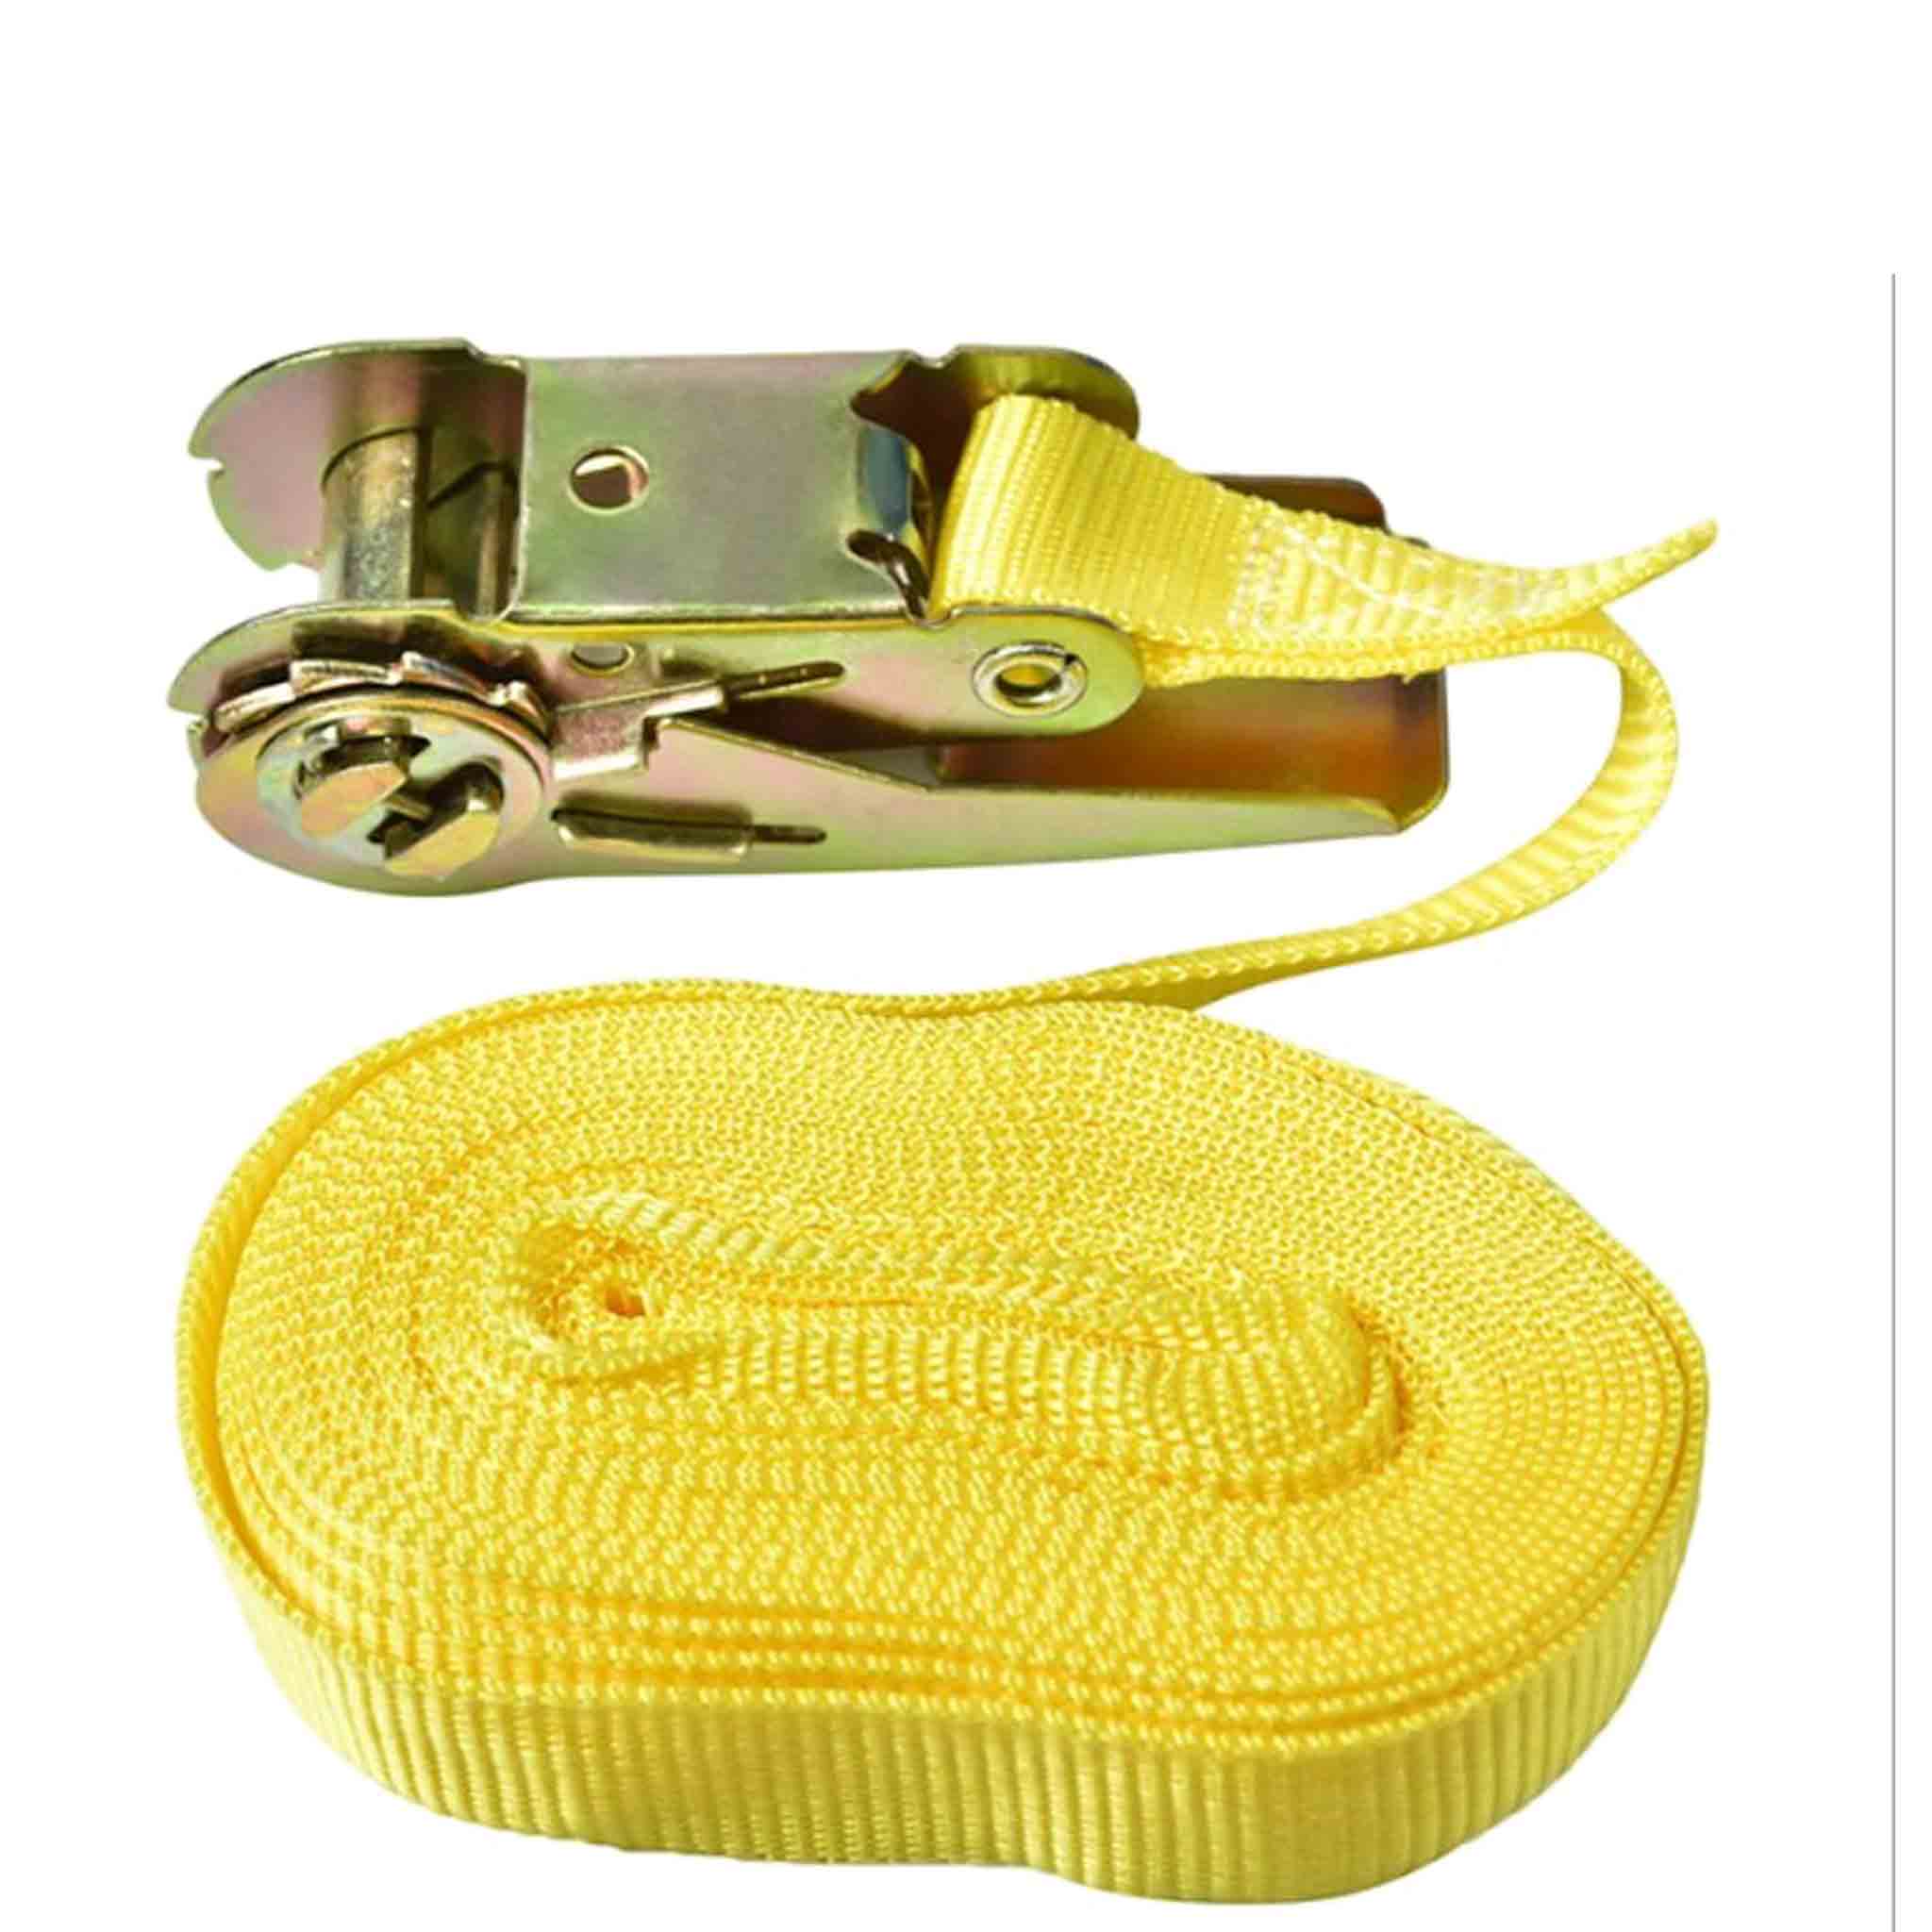 Beehive Strap General without Hook - Accessories collection by Buzzbee Beekeeping Supplies